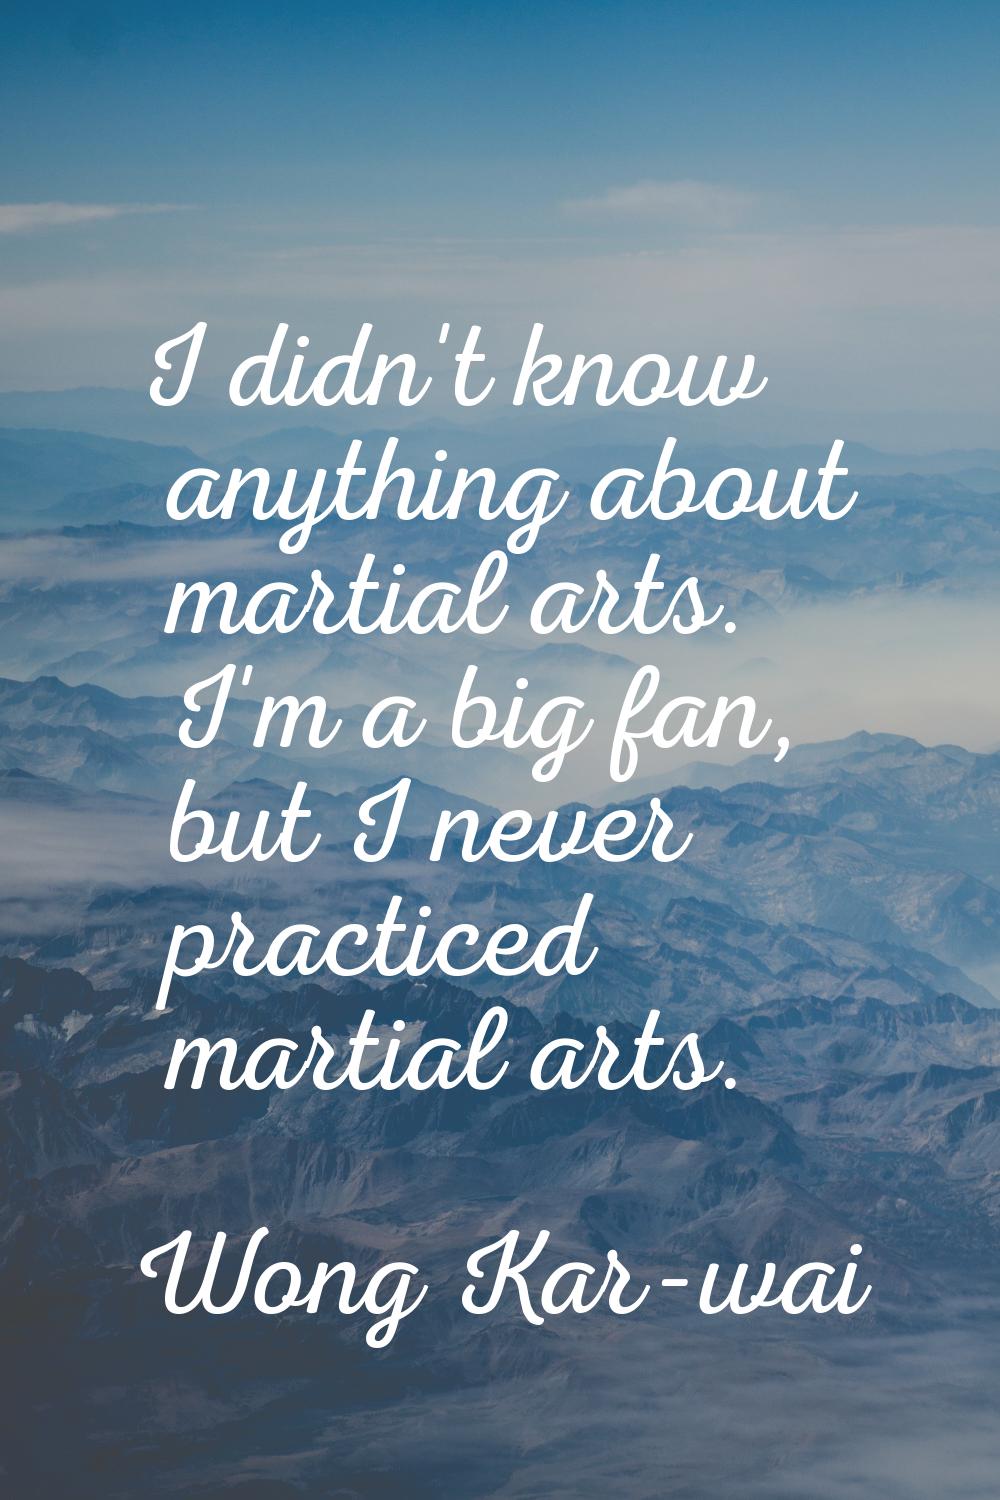 I didn't know anything about martial arts. I'm a big fan, but I never practiced martial arts.